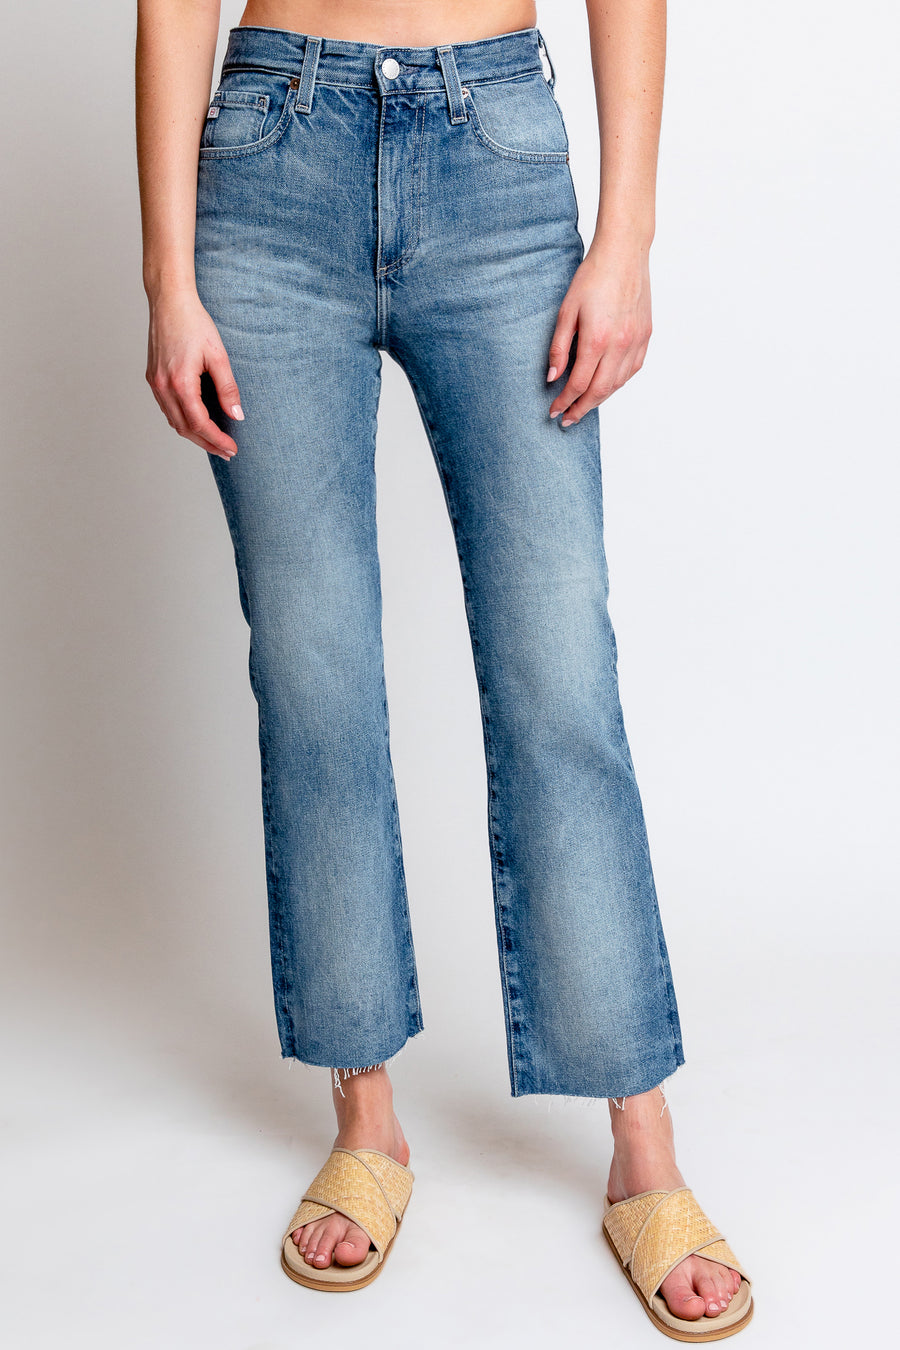 AG Jeans Kinsley High Rise Pop Crop in Superstition